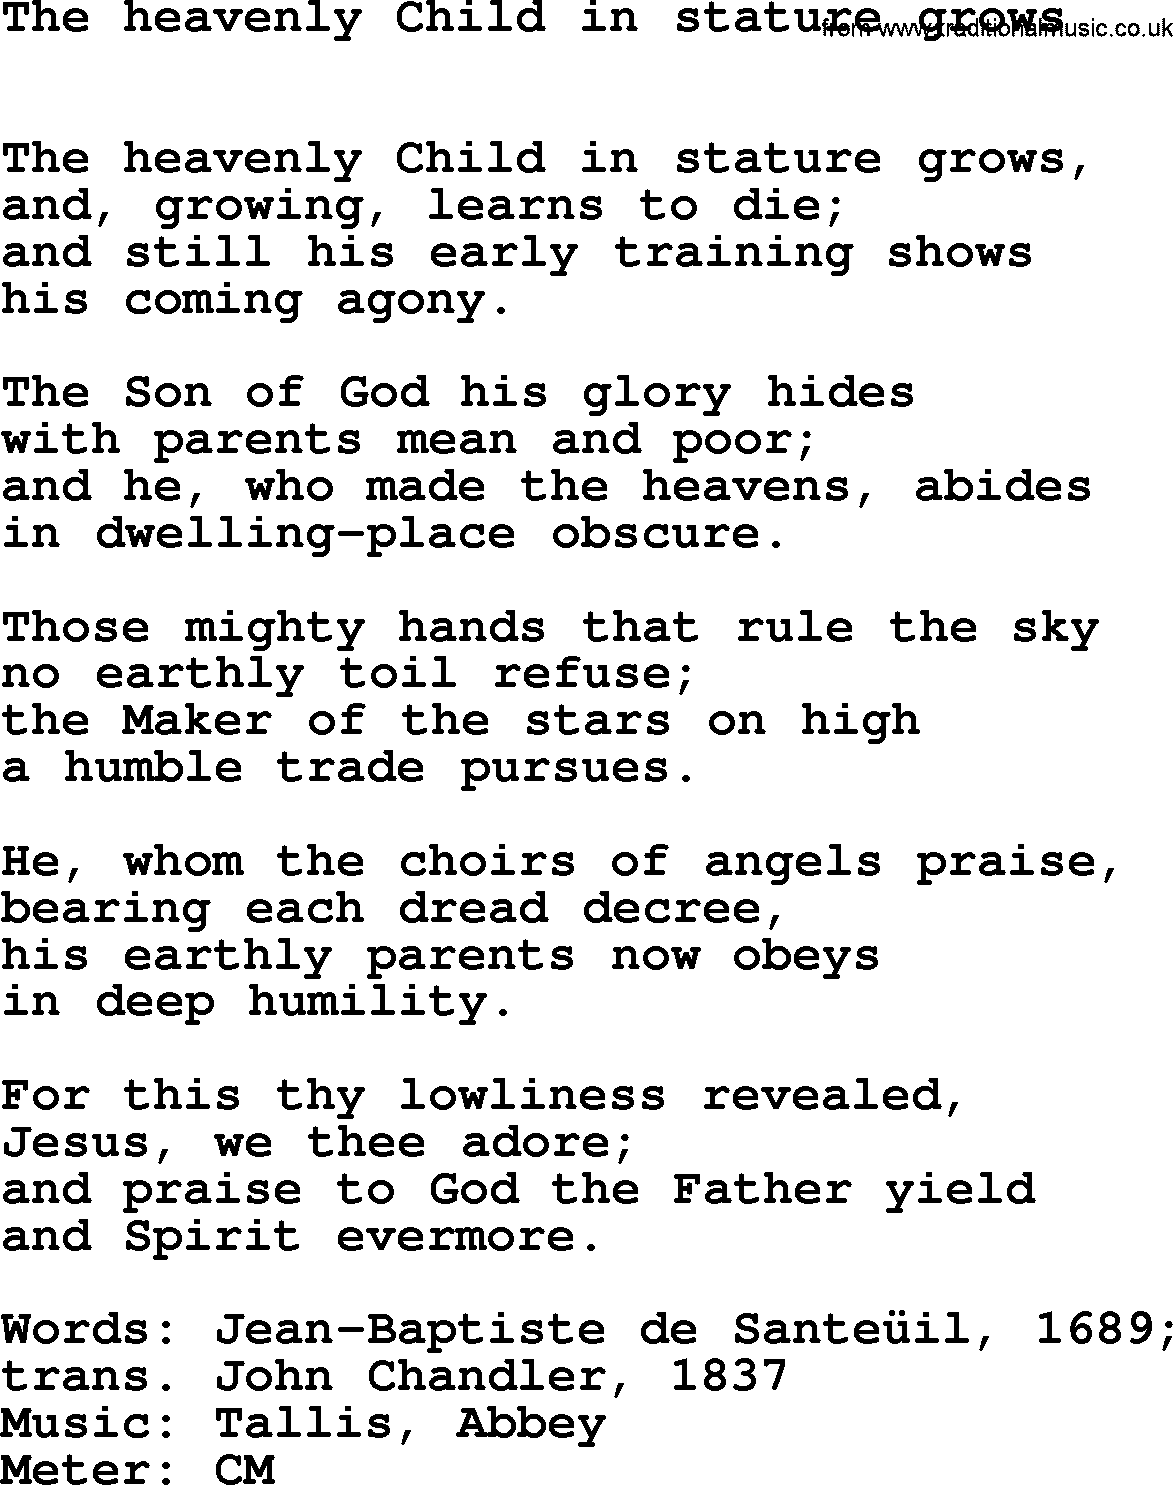 Book of Common Praise Hymn: The Heavenly Child In Stature Grows.txt lyrics with midi music